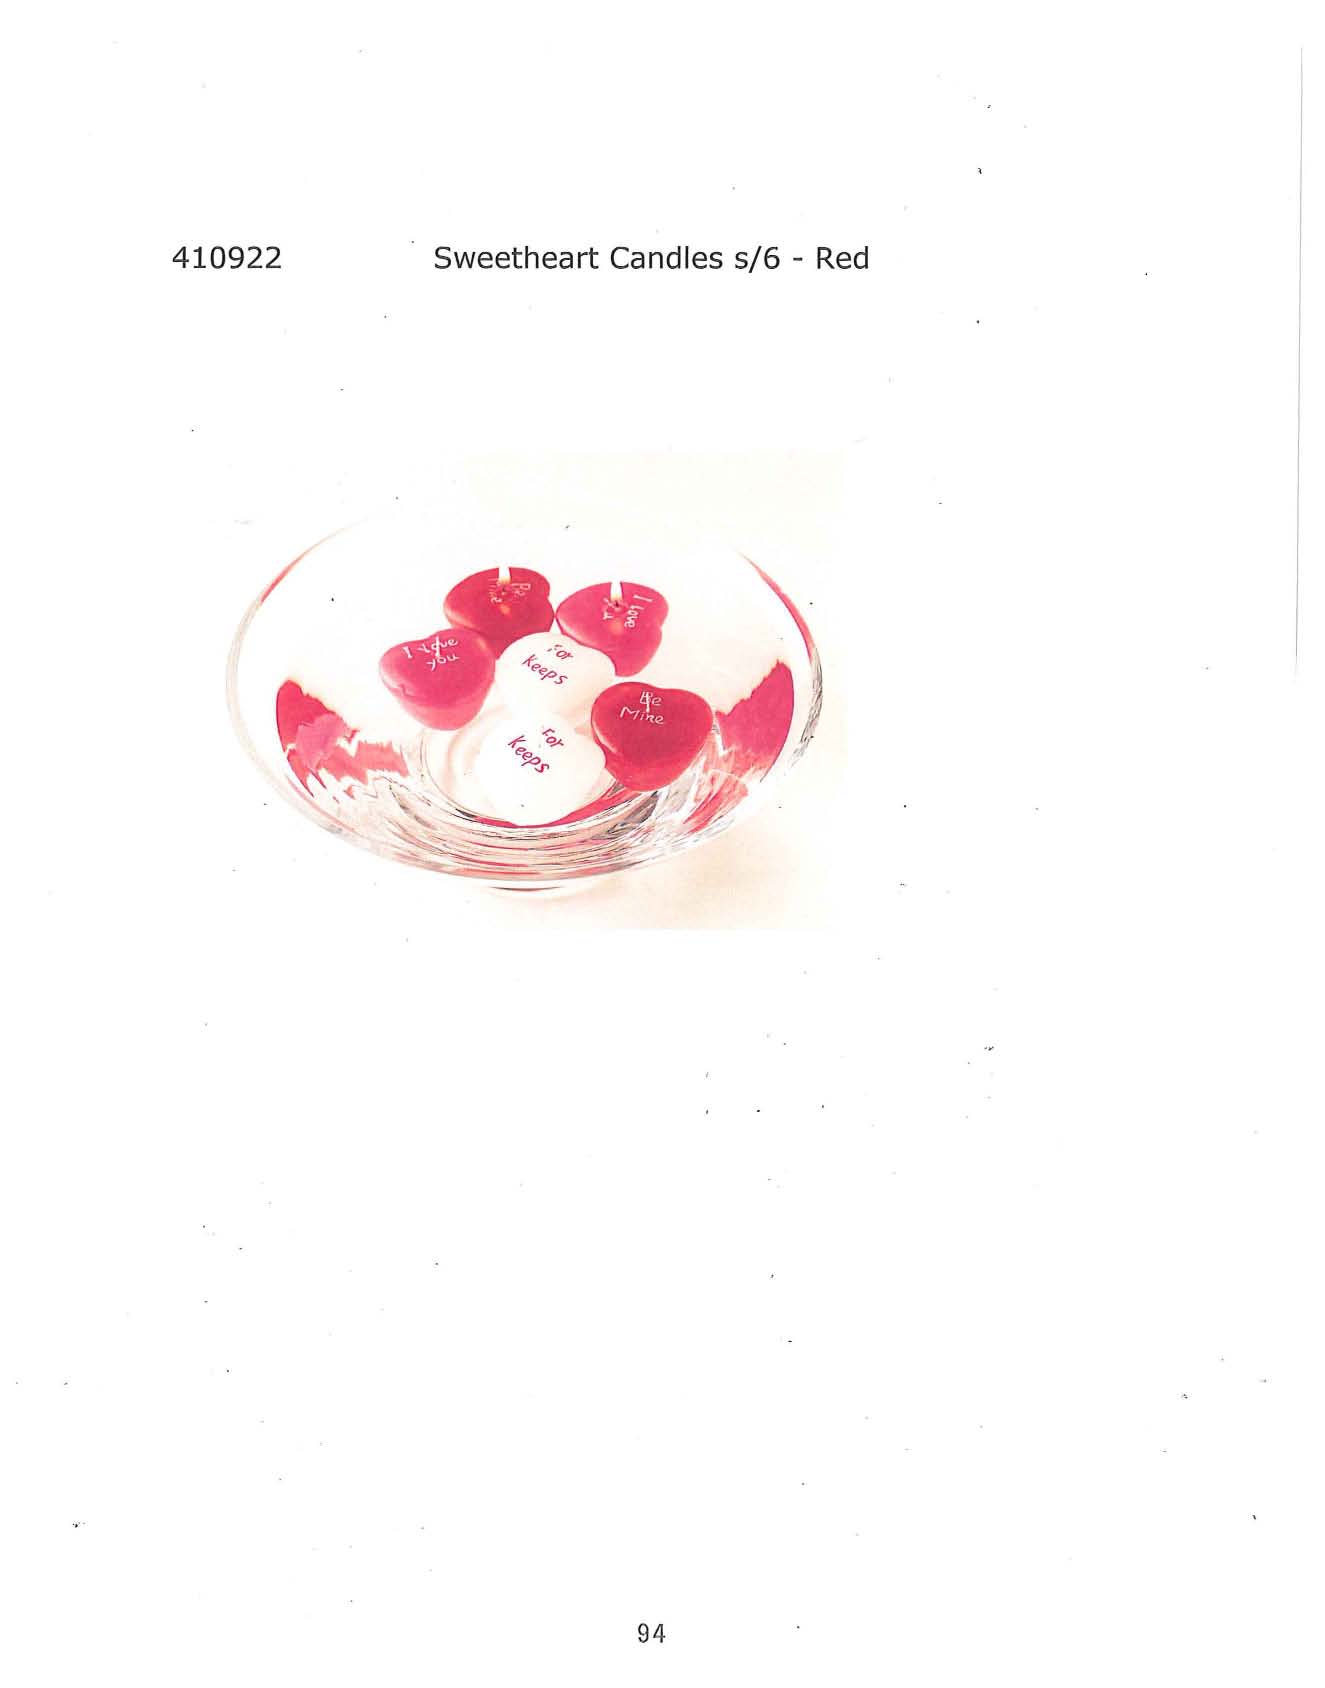 Sweetheart Candle s/6 - Red